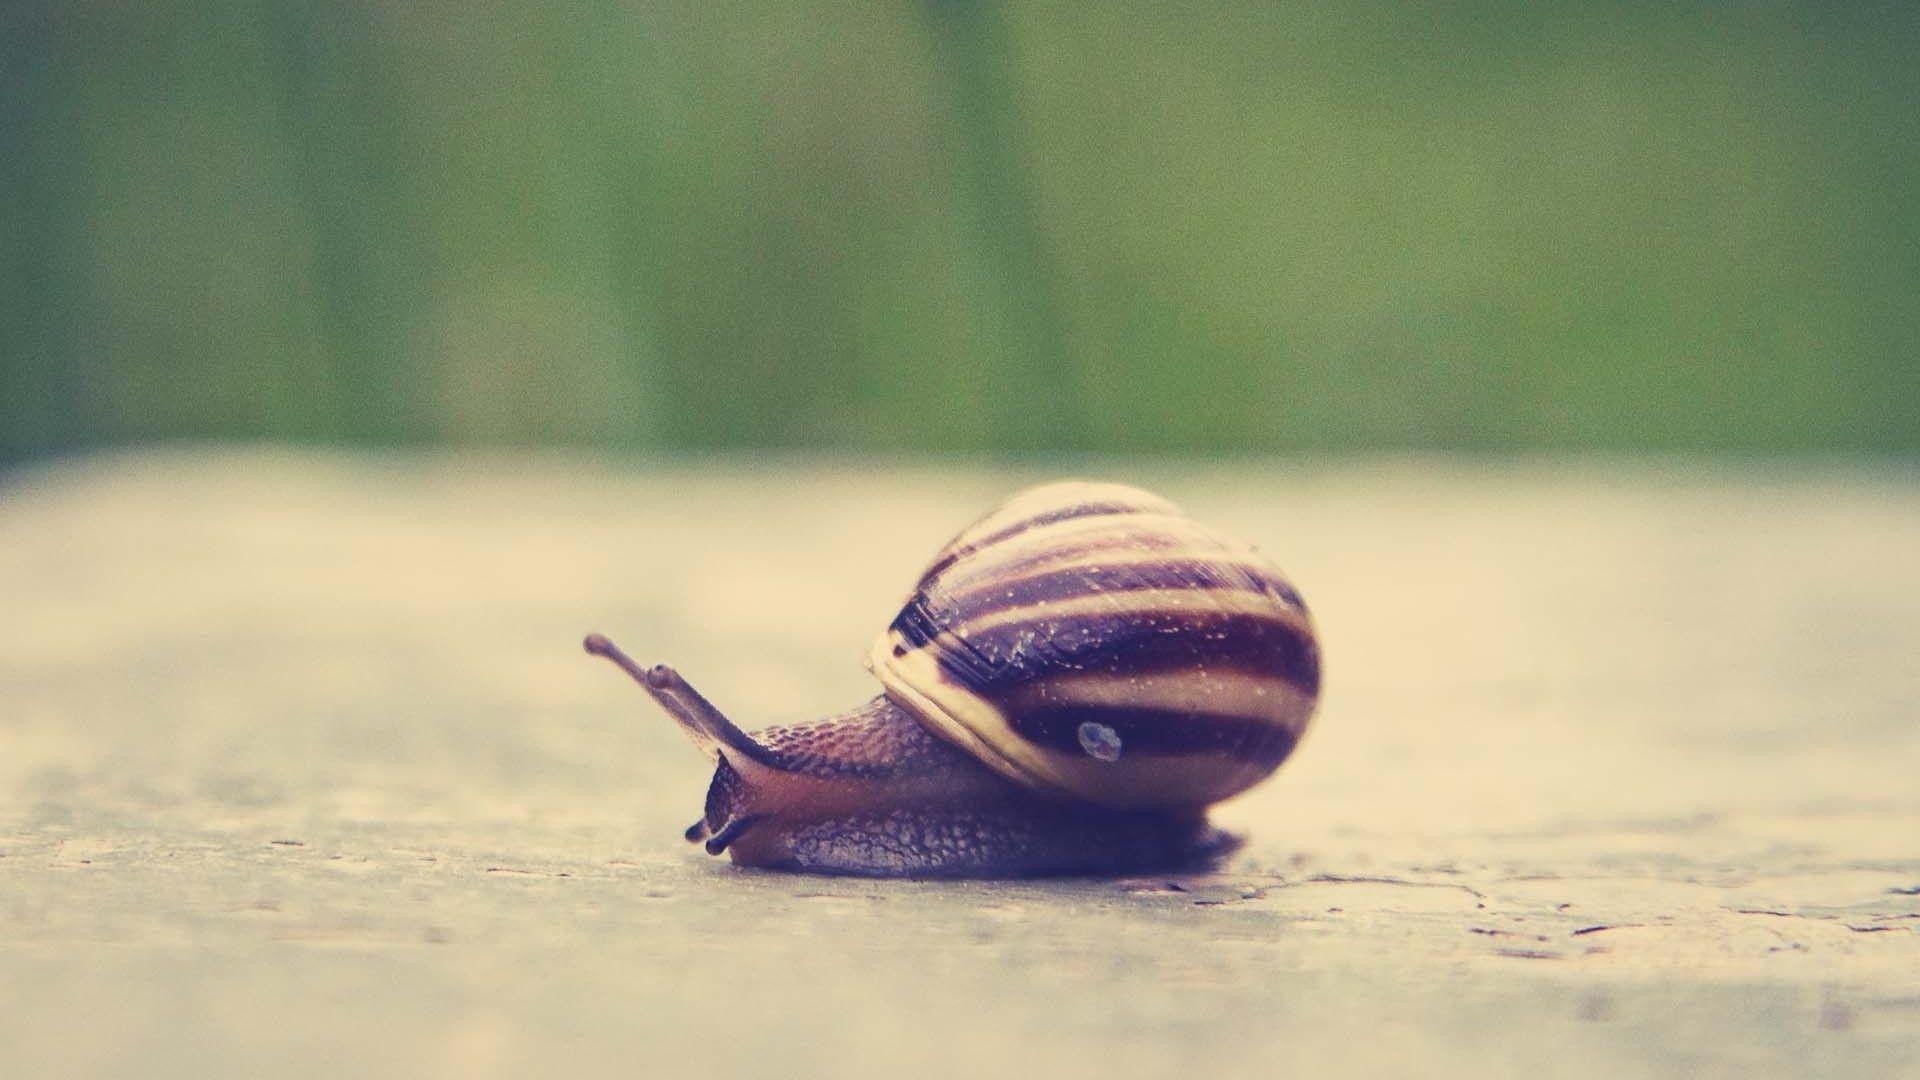 Snails And Mollusks Wallpapers, Desk 4K K High Quality Wallpaper, W